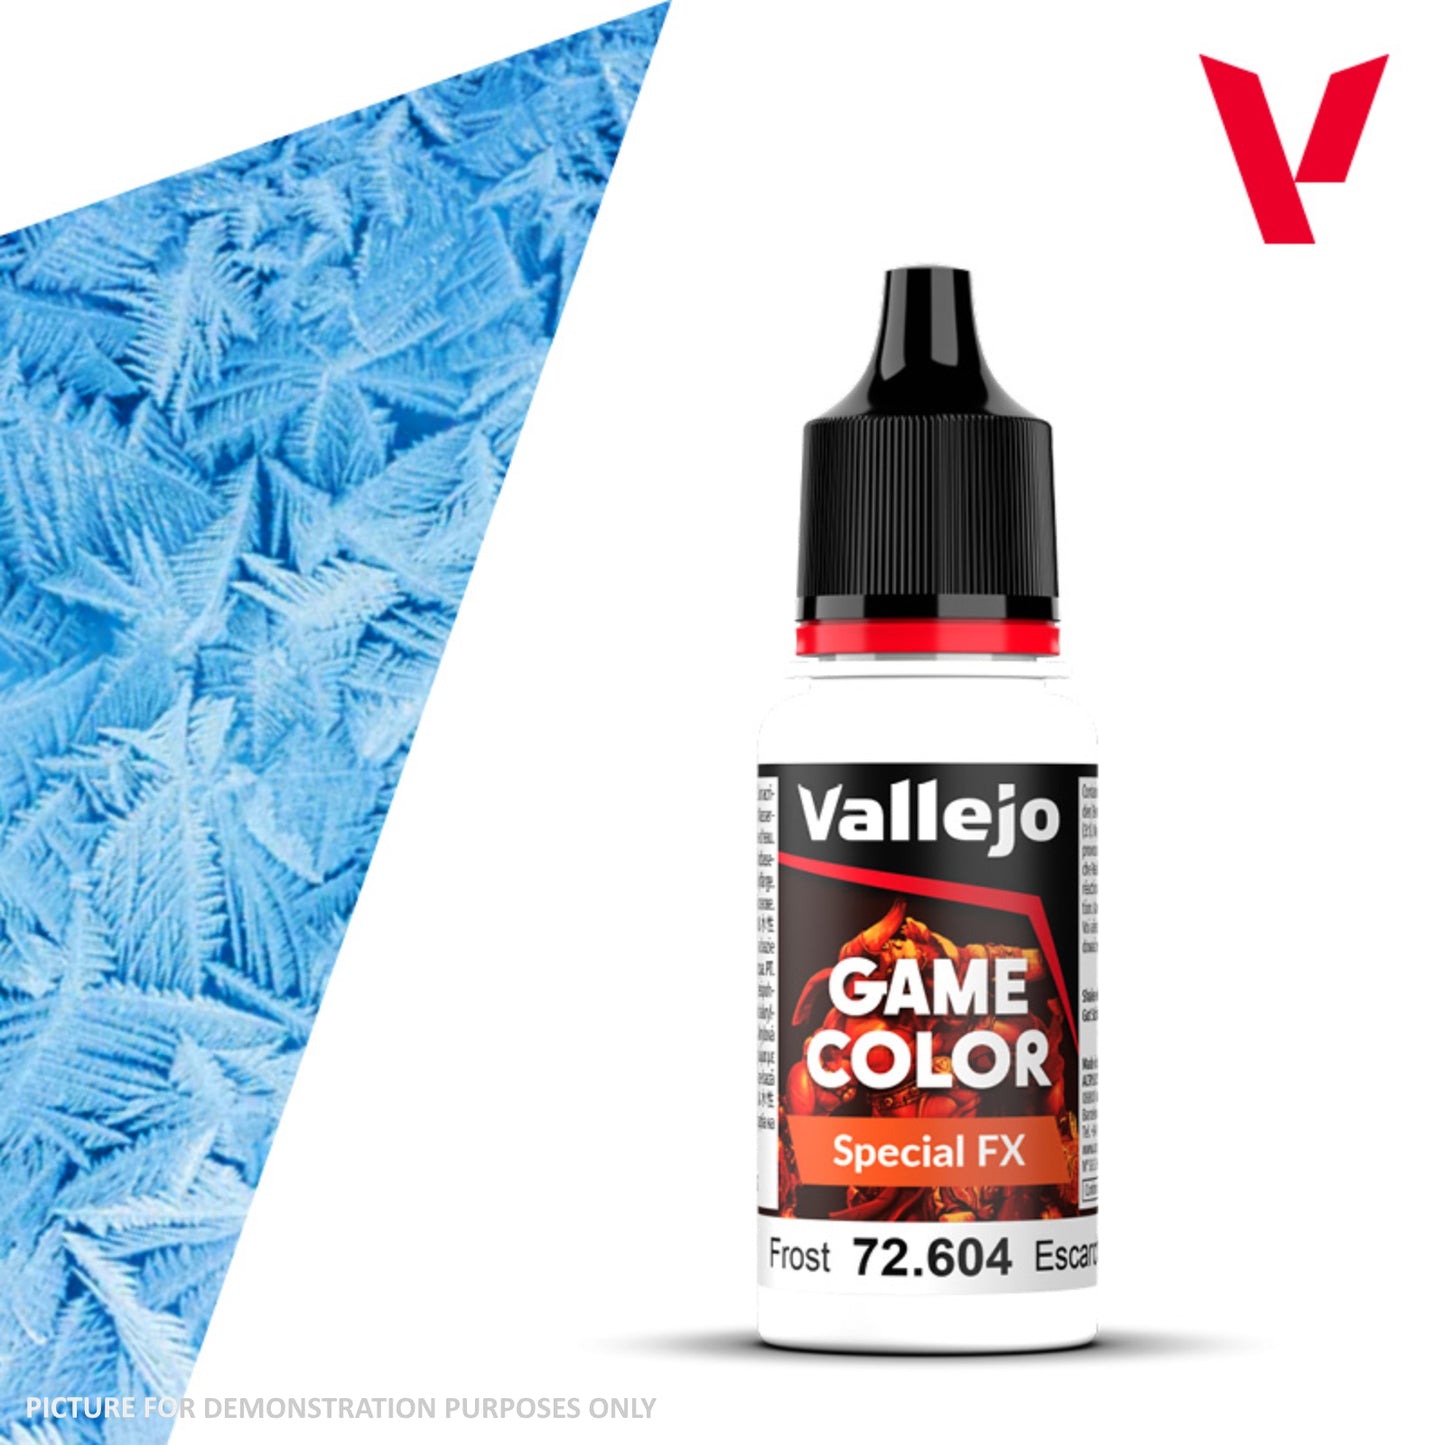 Vallejo Game Colour Special FX - 72.604 Frost 18ml